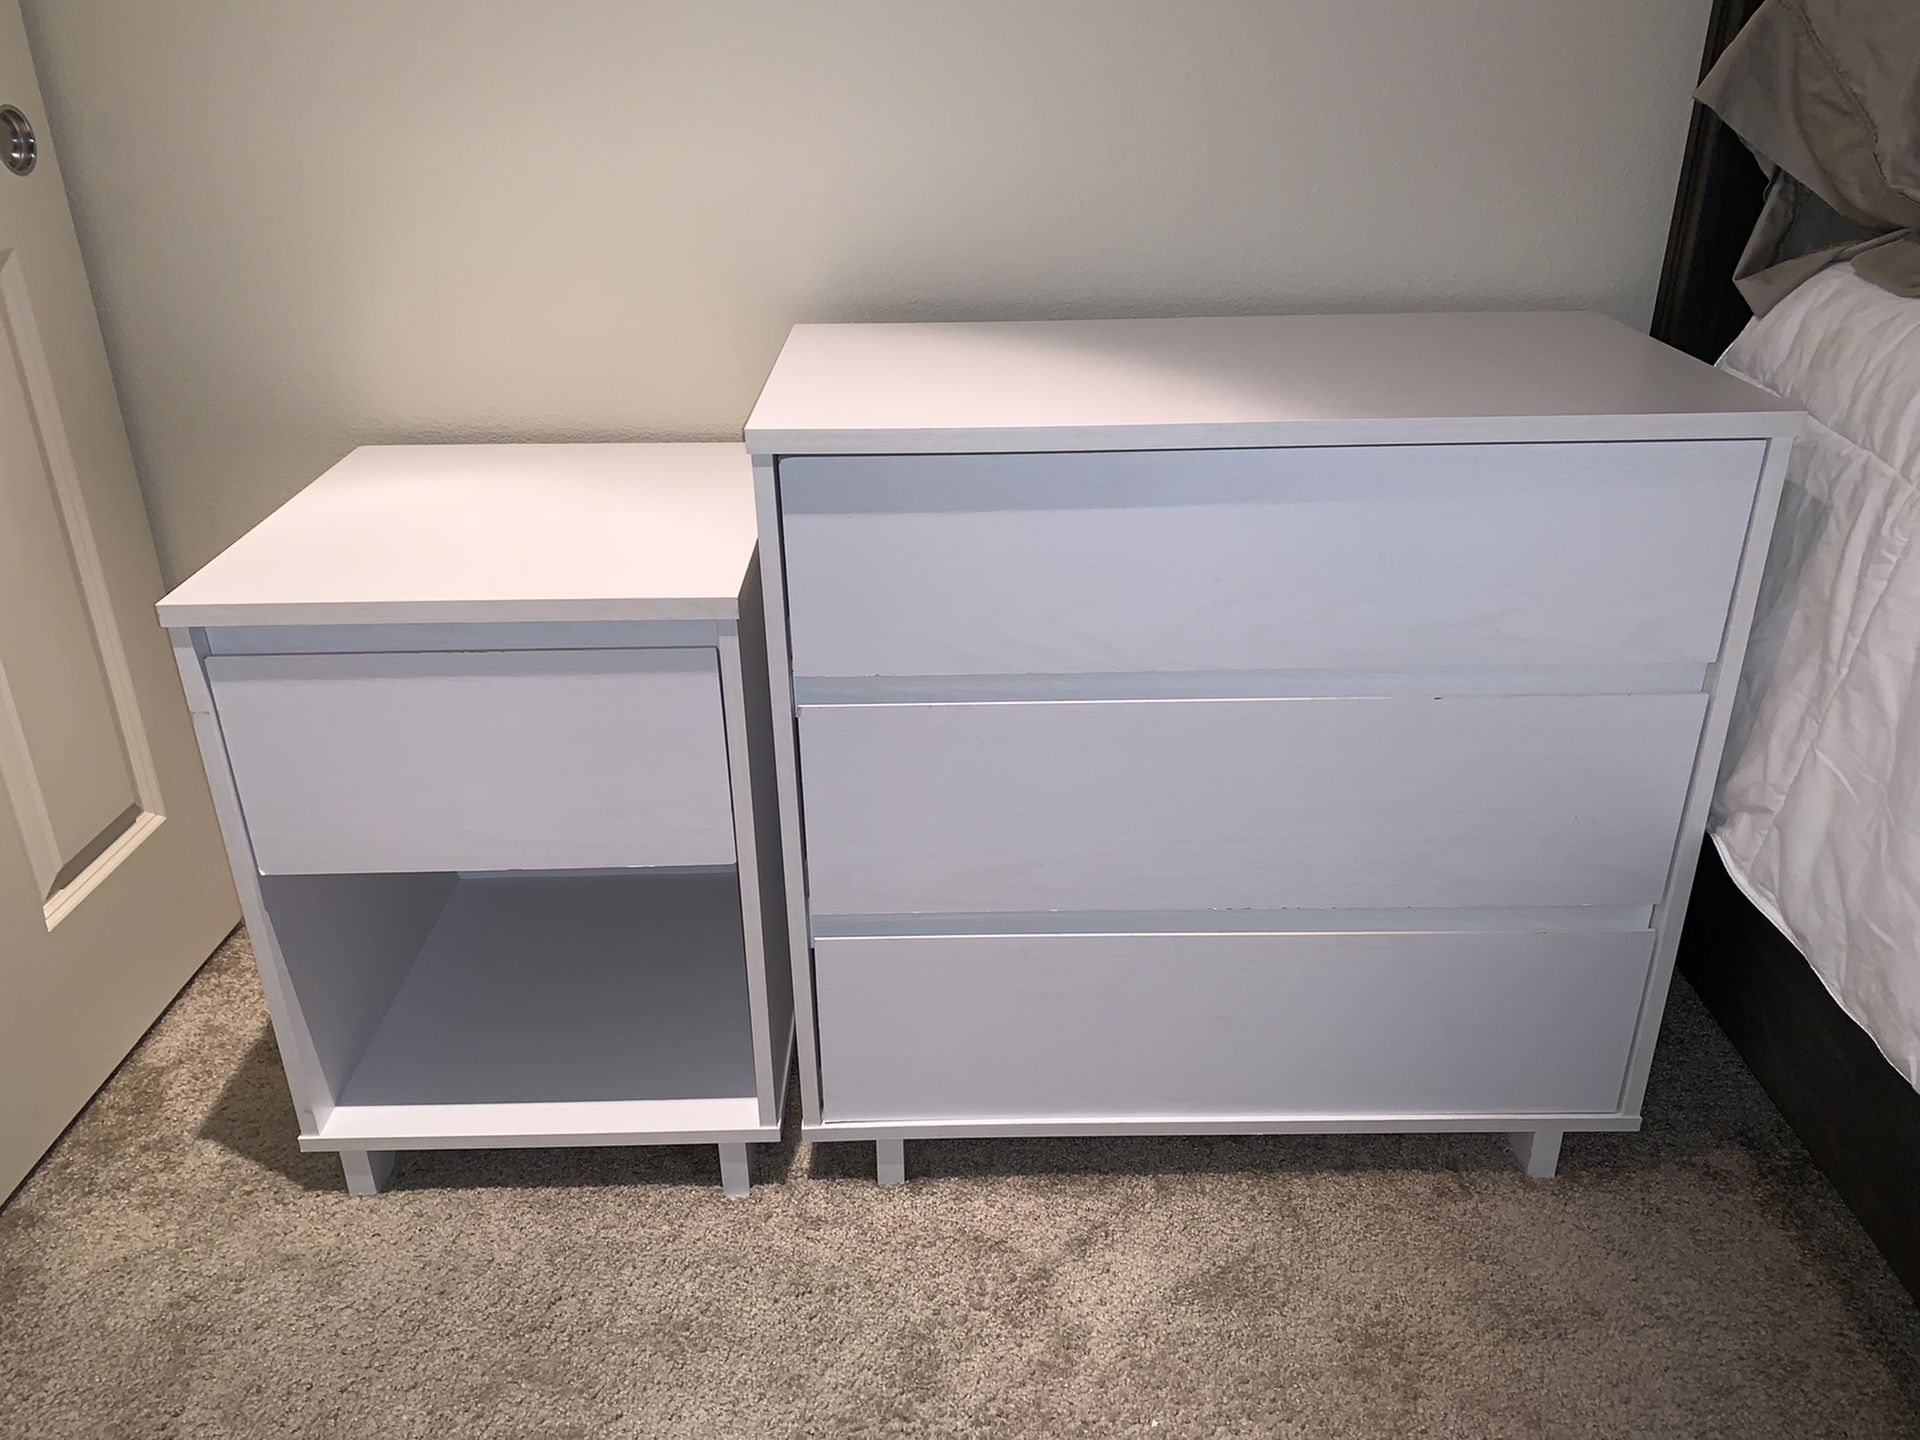 3 drawer dresser & night stand - white (see pics for dimensions & material)